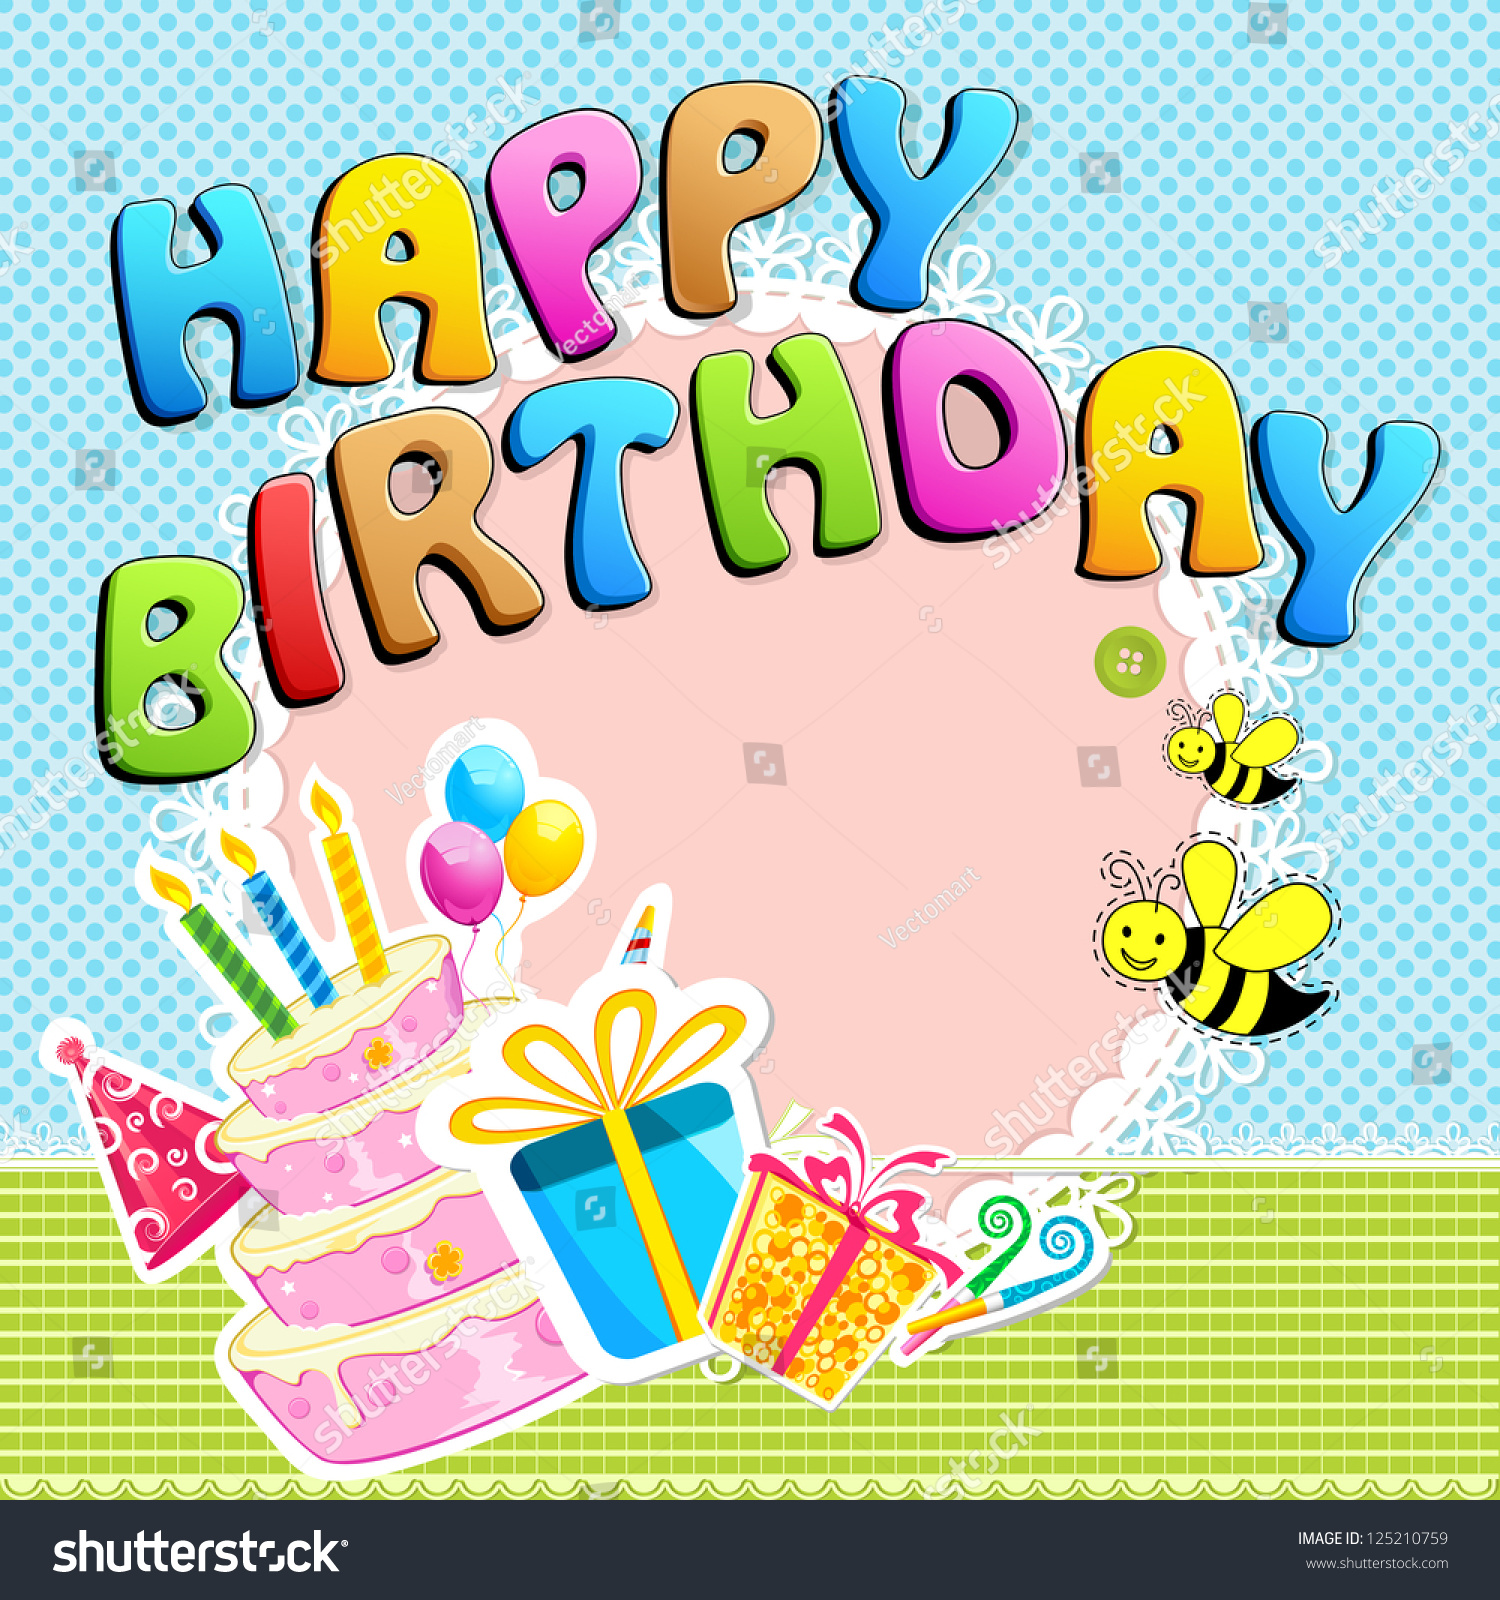 Illustration Of Happy Birthday Text With Scrapbook Element - 125210759 ...